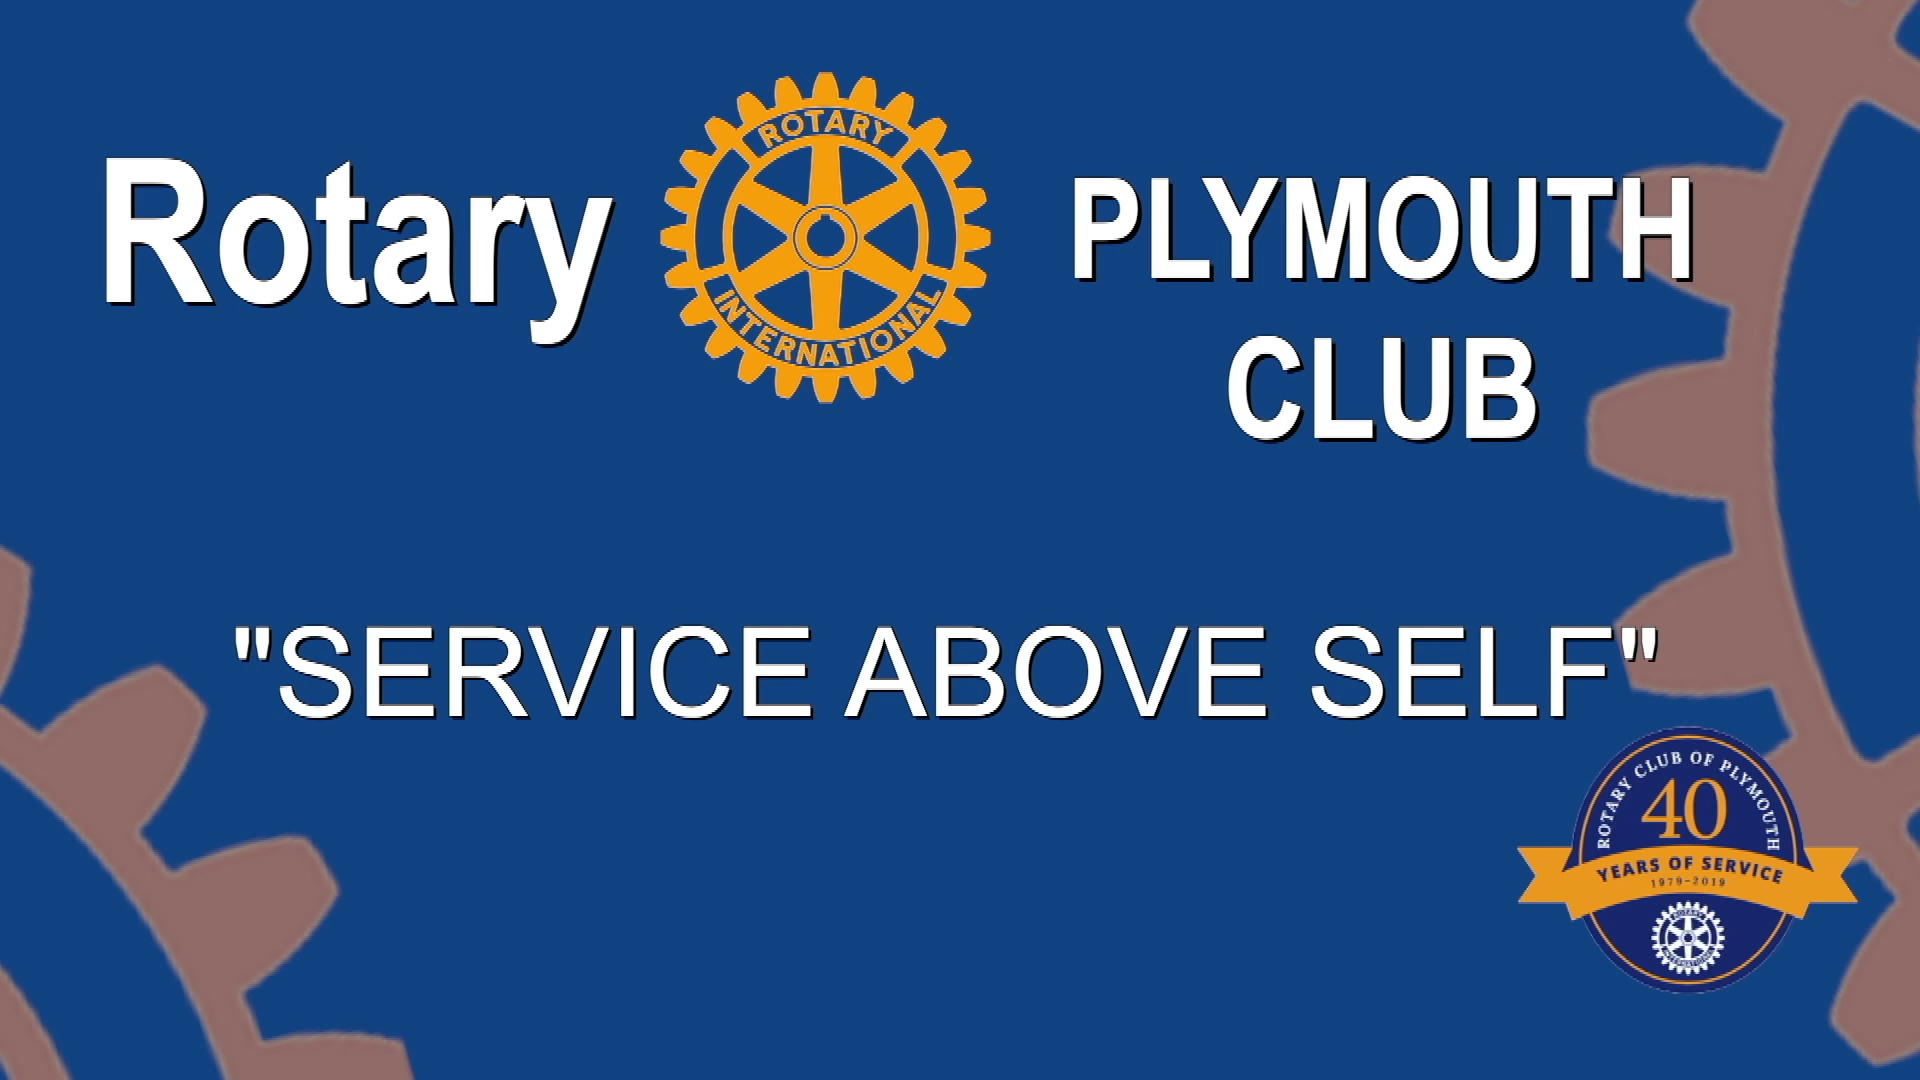 Rotary Plymouth Club - Service Above Self